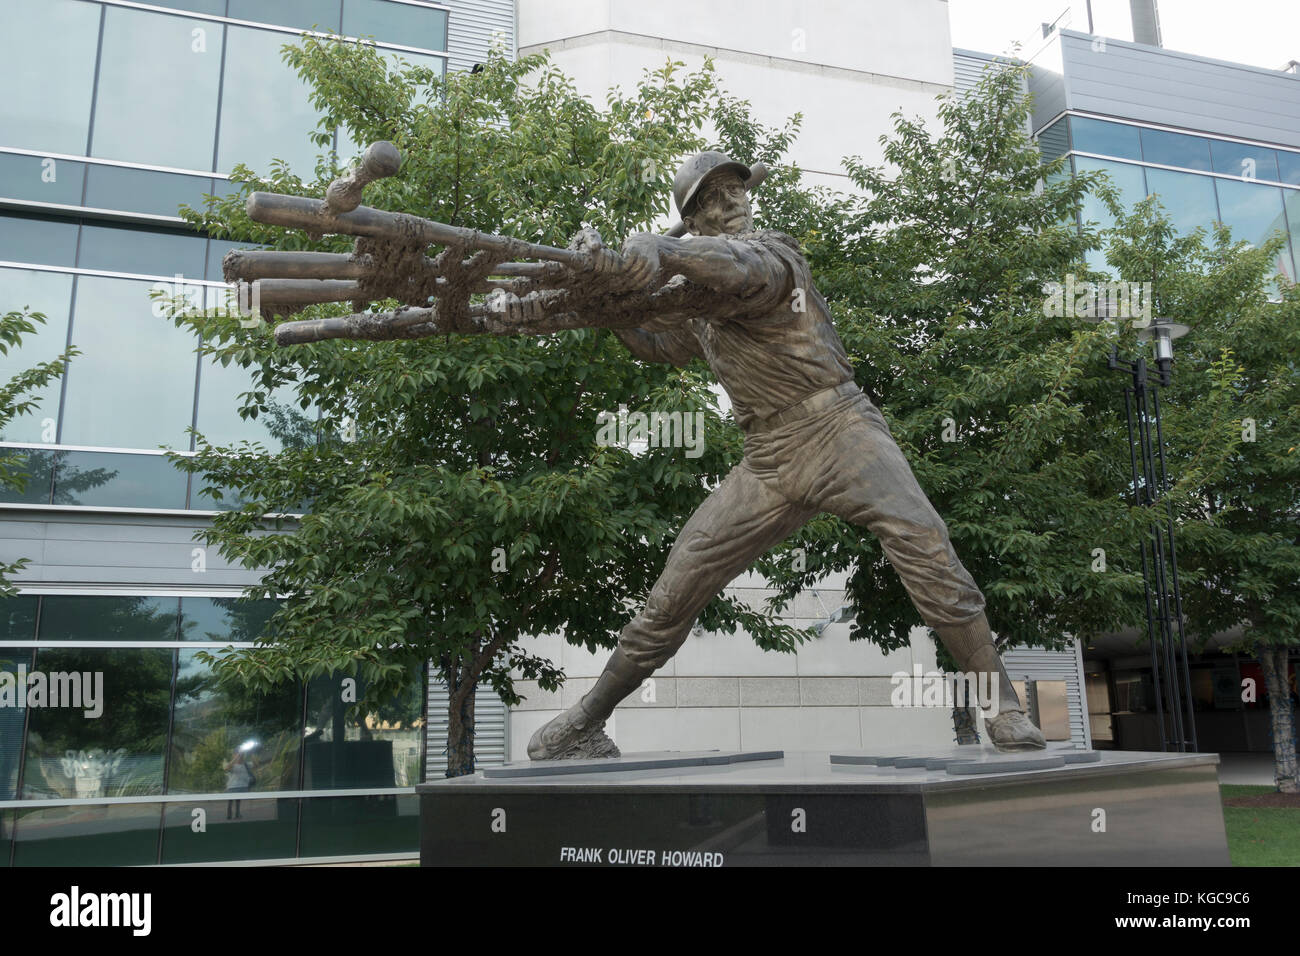 Statue of Frank Oliver Howard ('Hondo') at the entrance to Nationals Park, home of the Washington Nationals, Washington DC, United States. Stock Photo